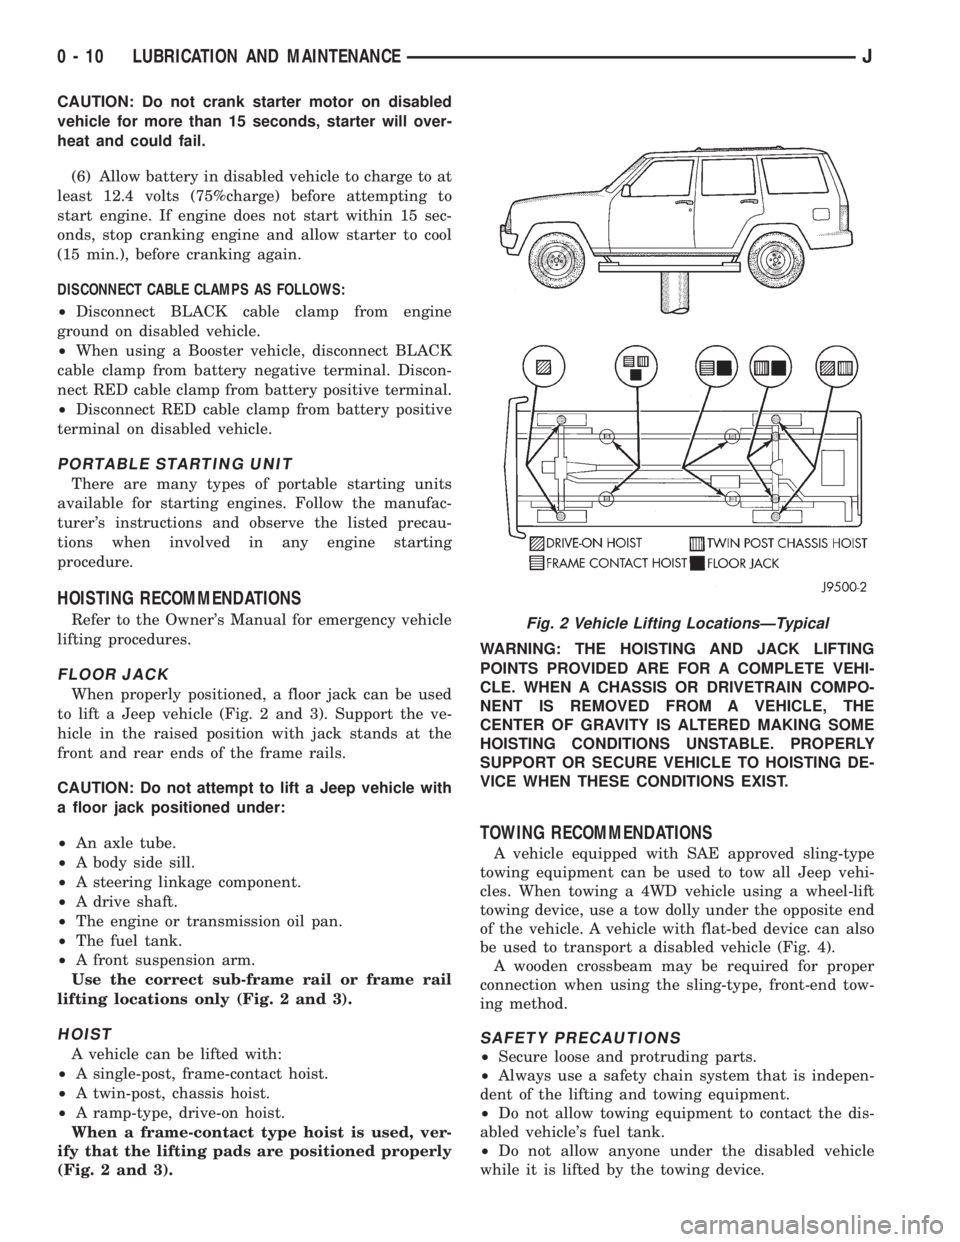 JEEP YJ 1995  Service And Repair Manual CAUTION: Do not crank starter motor on disabled
vehicle for more than 15 seconds, starter will over-
heat and could fail.
(6) Allow battery in disabled vehicle to charge to at
least 12.4 volts (75%cha